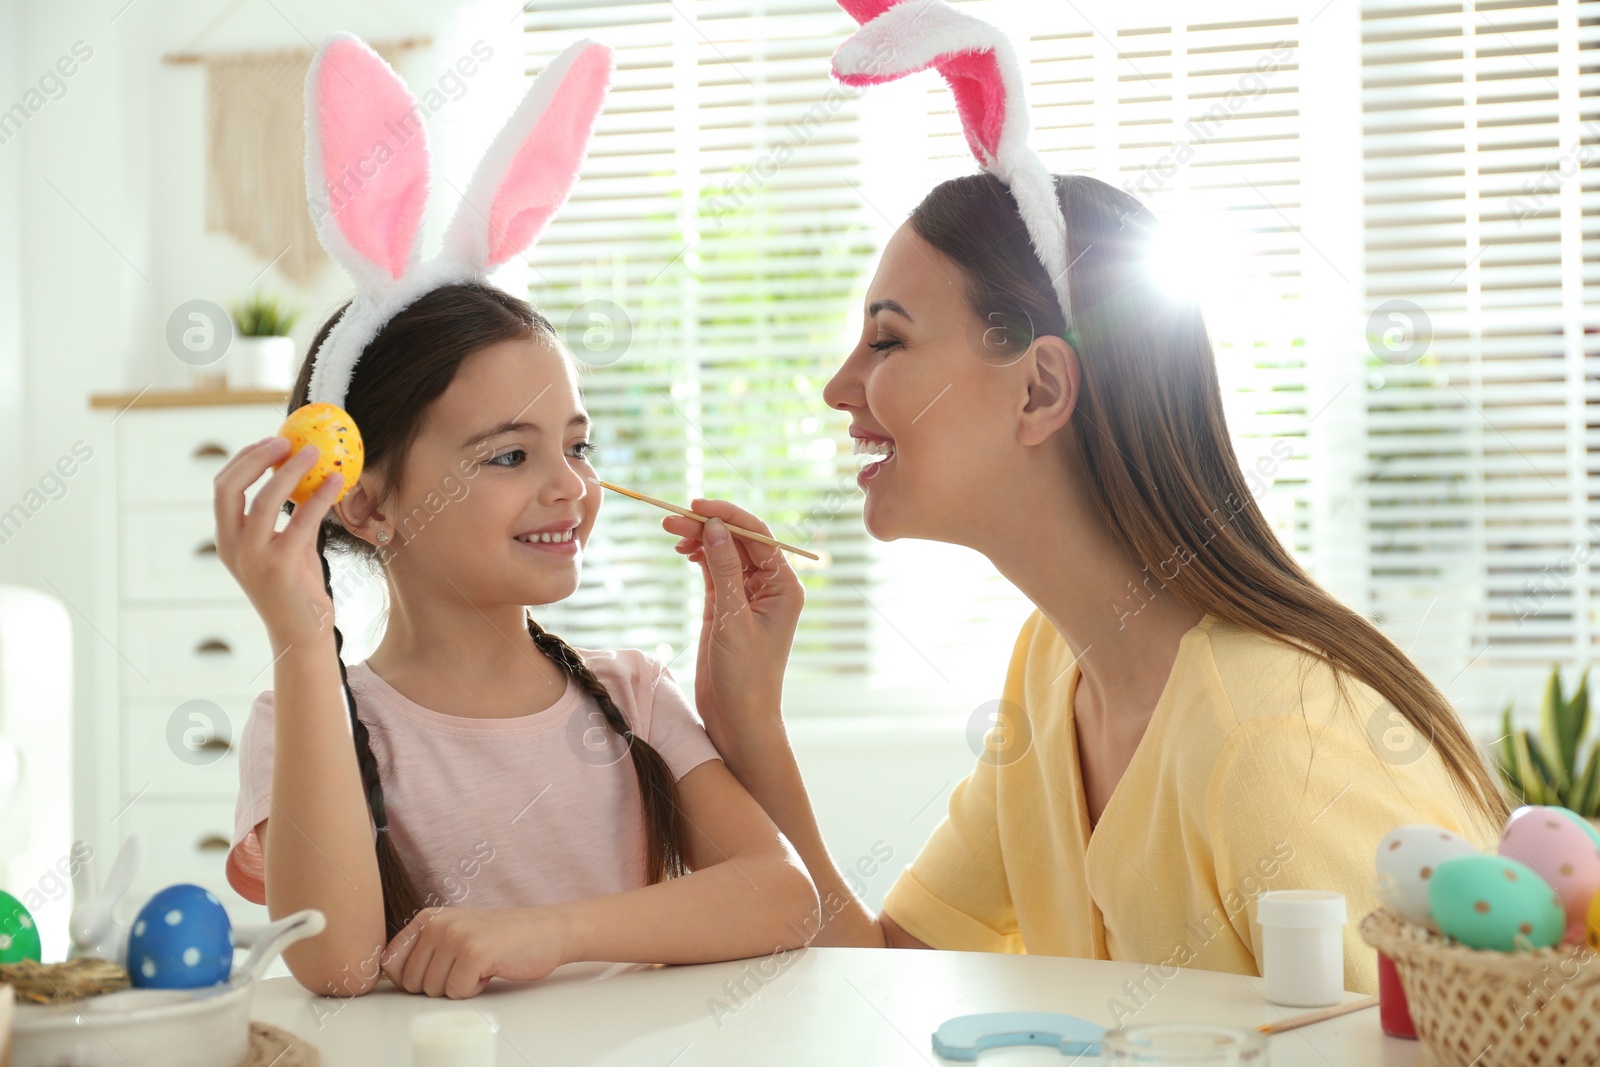 Photo of Happy mother and daughter with bunny ears headbands having fun while painting Easter egg at home